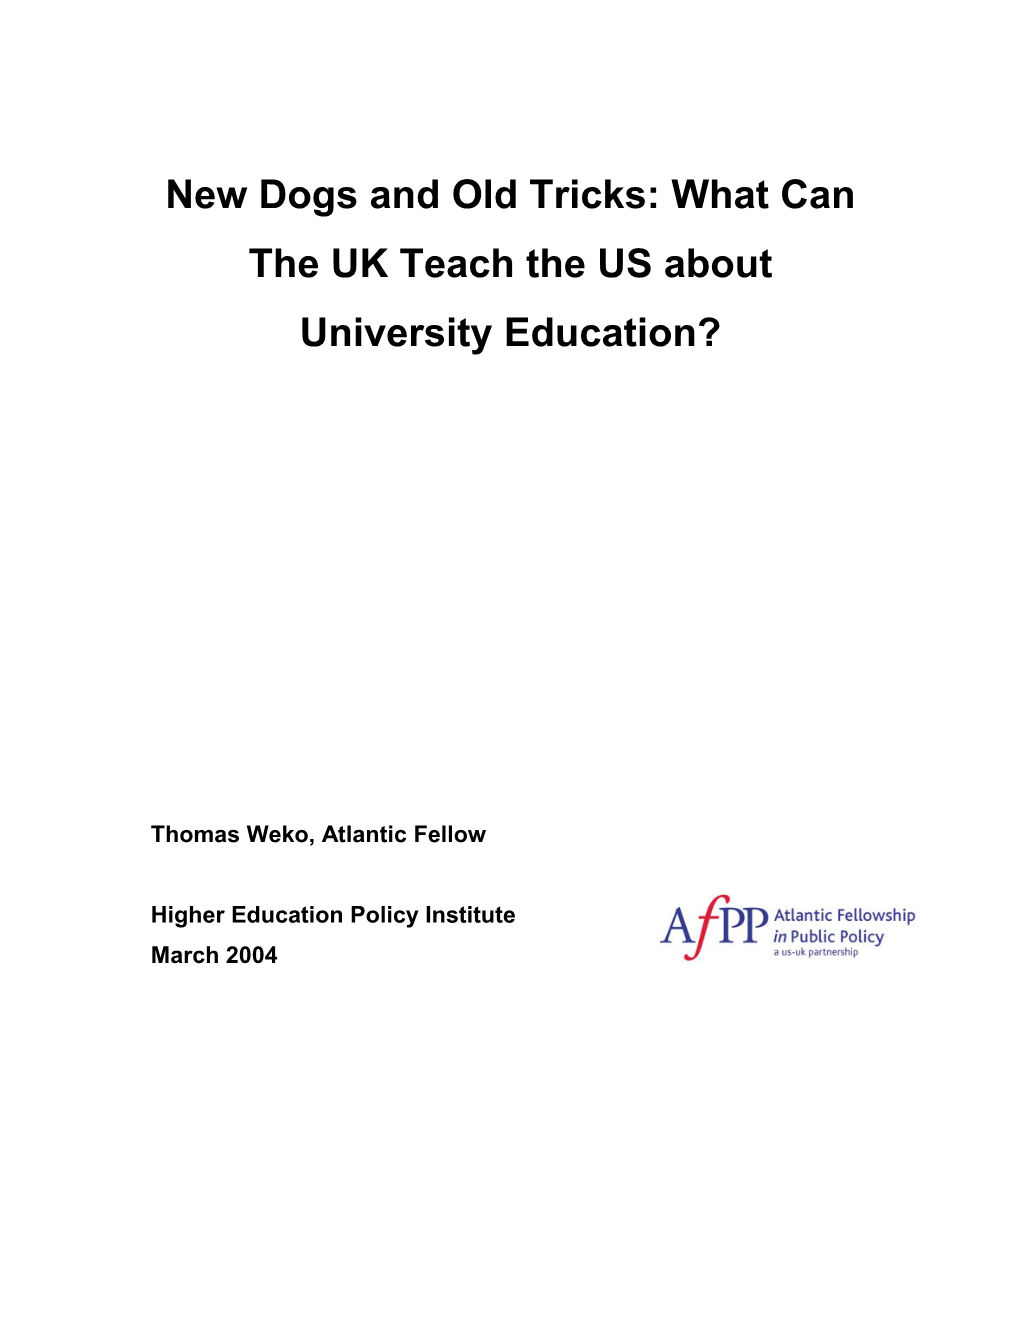 New Dogs and Old Tricks: What Can the UK Teach the US About University Education?